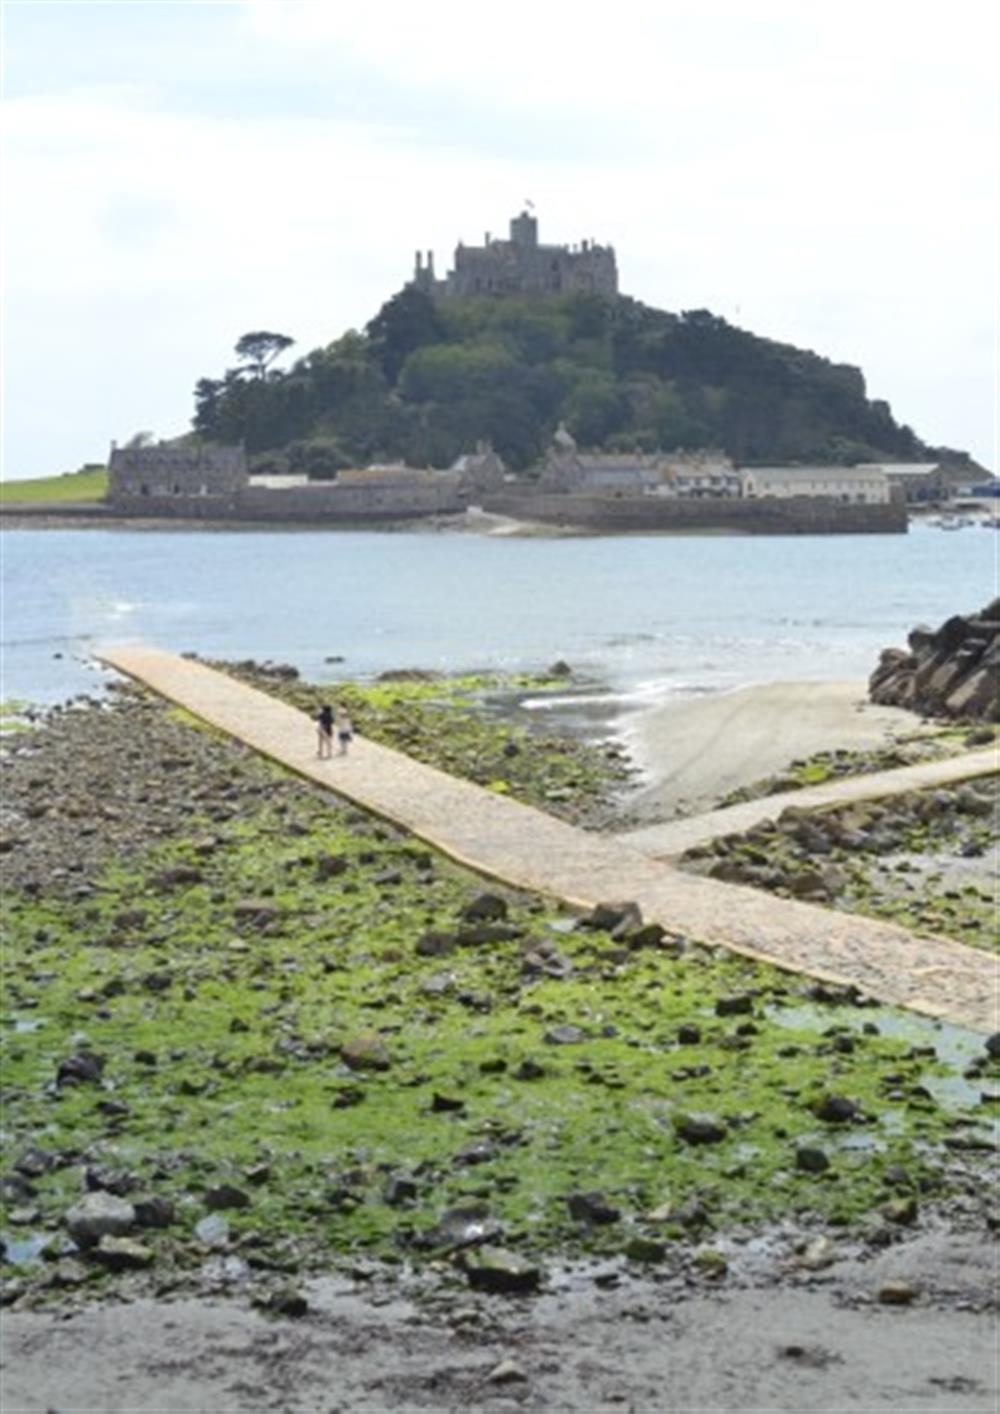 St Michael's Mount is 45 minutes away. Cross the causeway or catch the water-taxi across to the island.